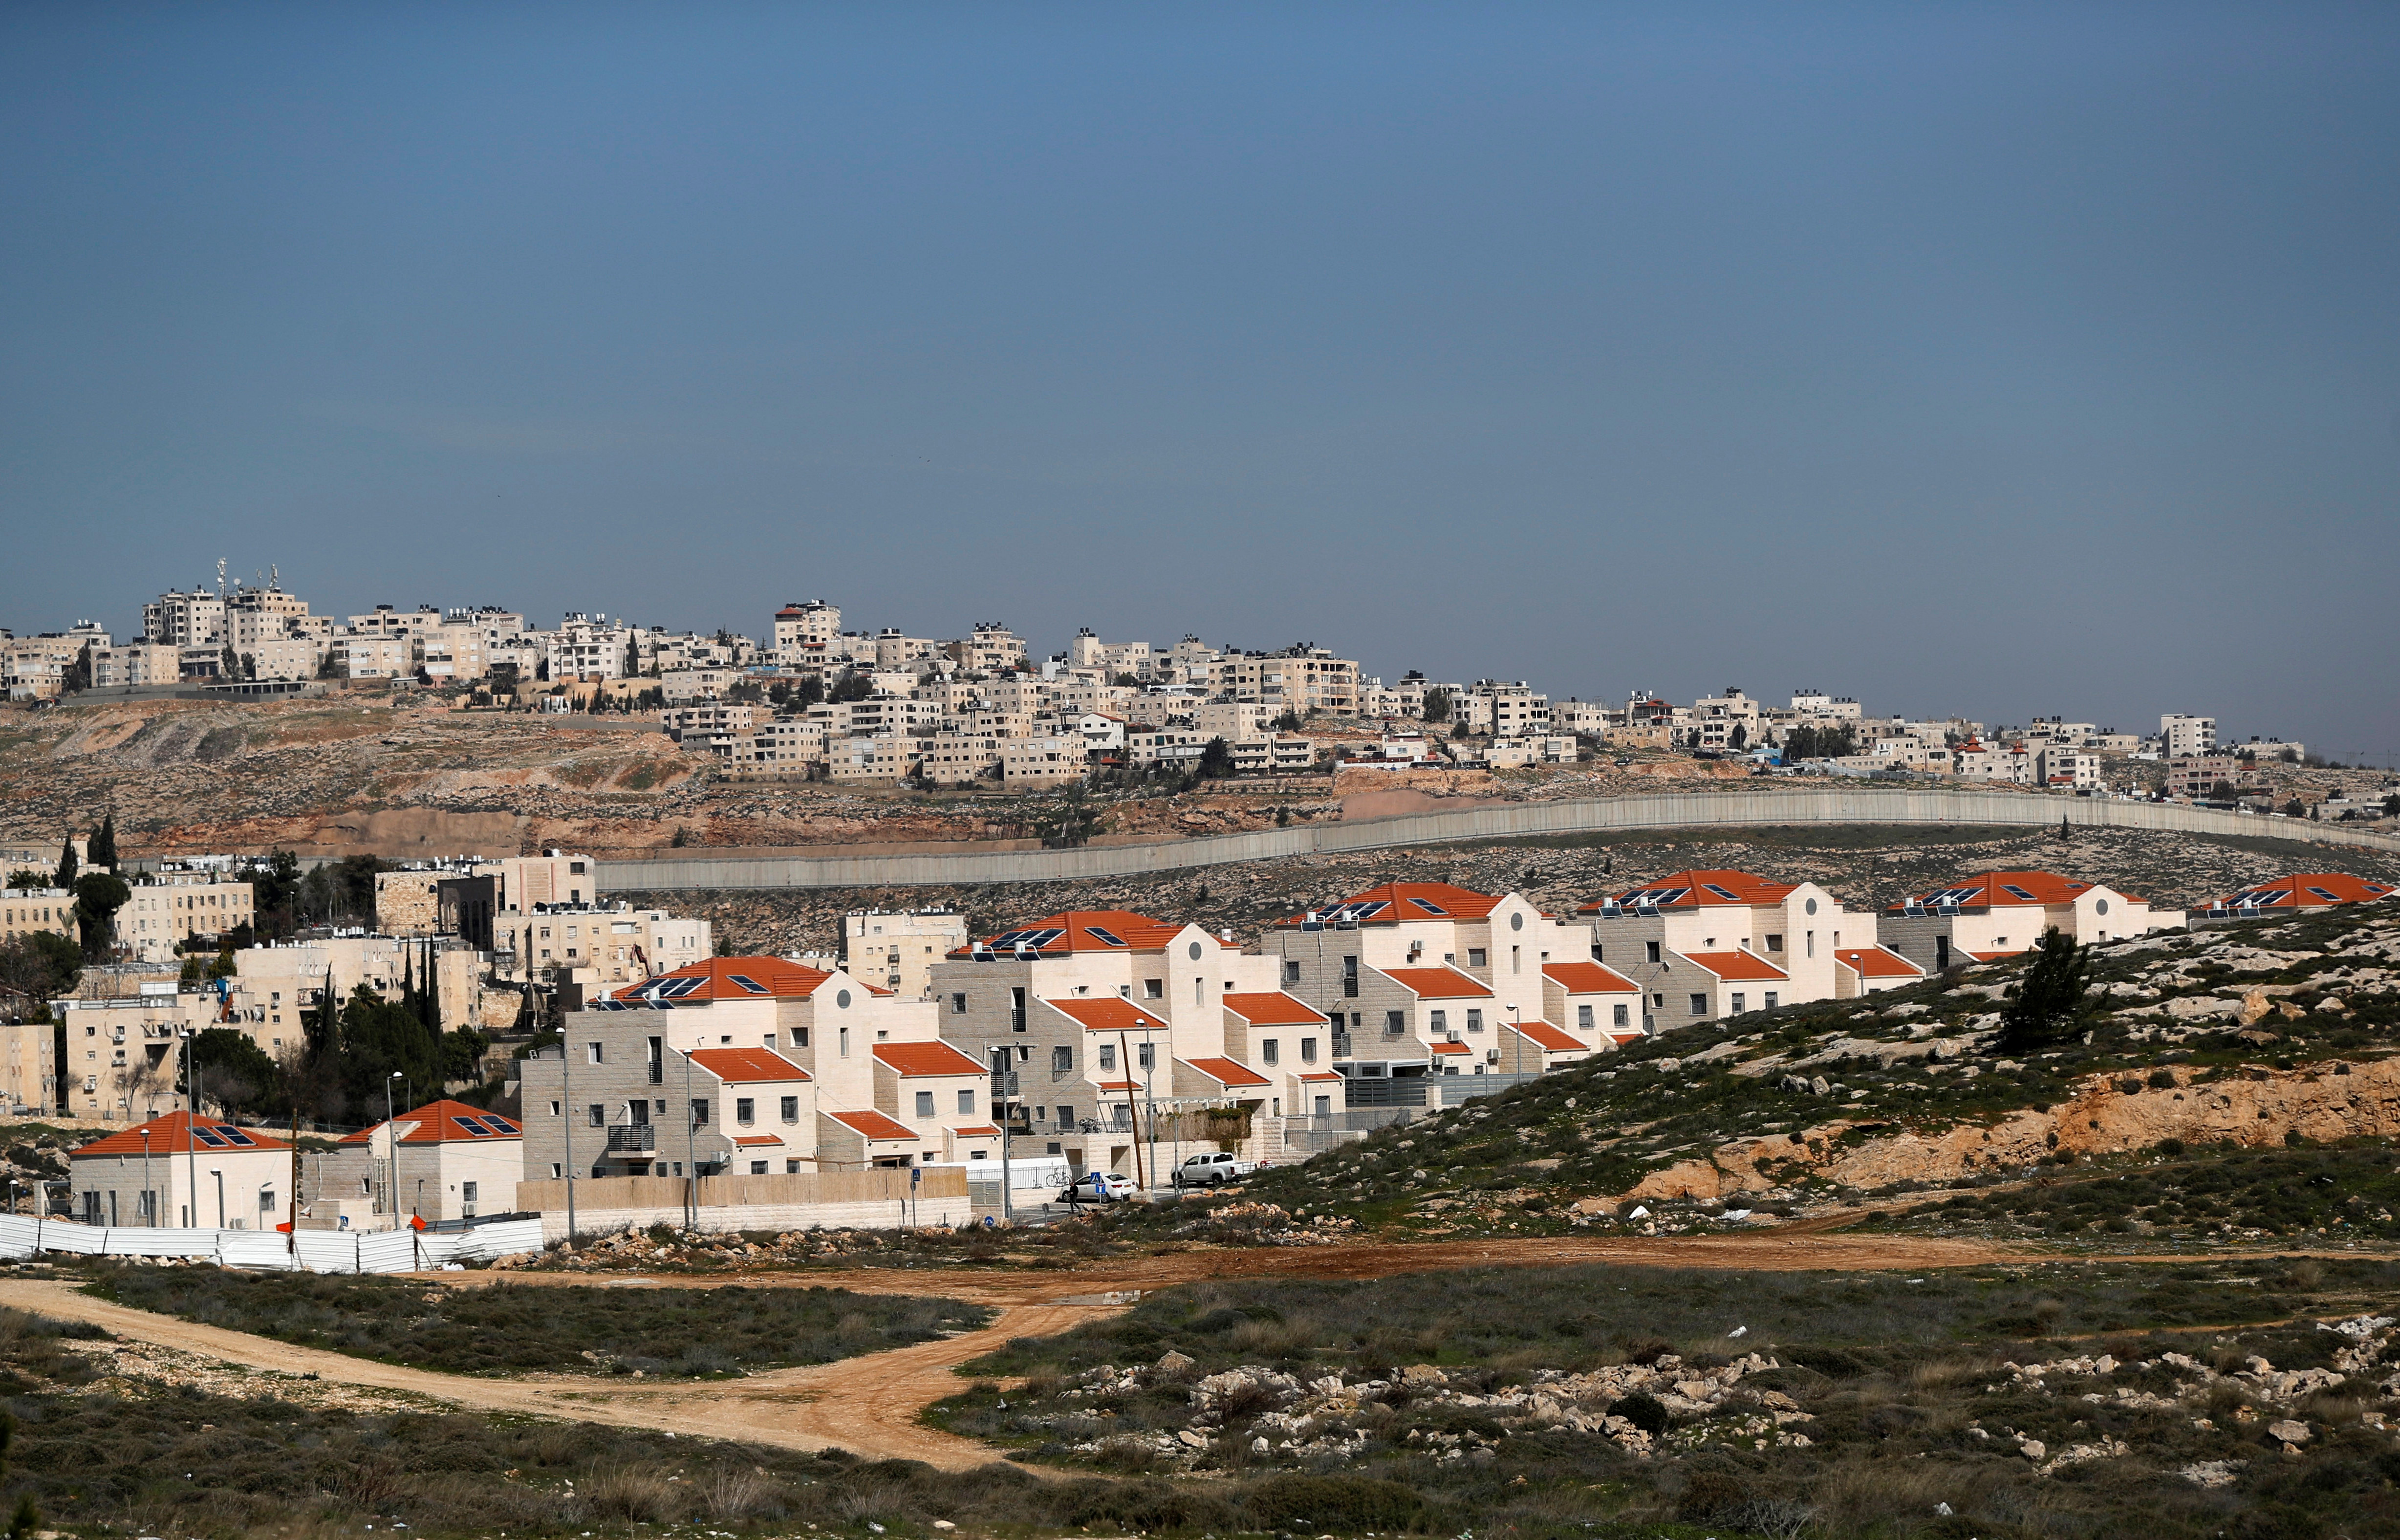 A view shows the Israeli settlement of Pisgat Zeev in the foreground as the Palestinian town of Al-Ram is seen in the background in the Israeli-occupied West Bank